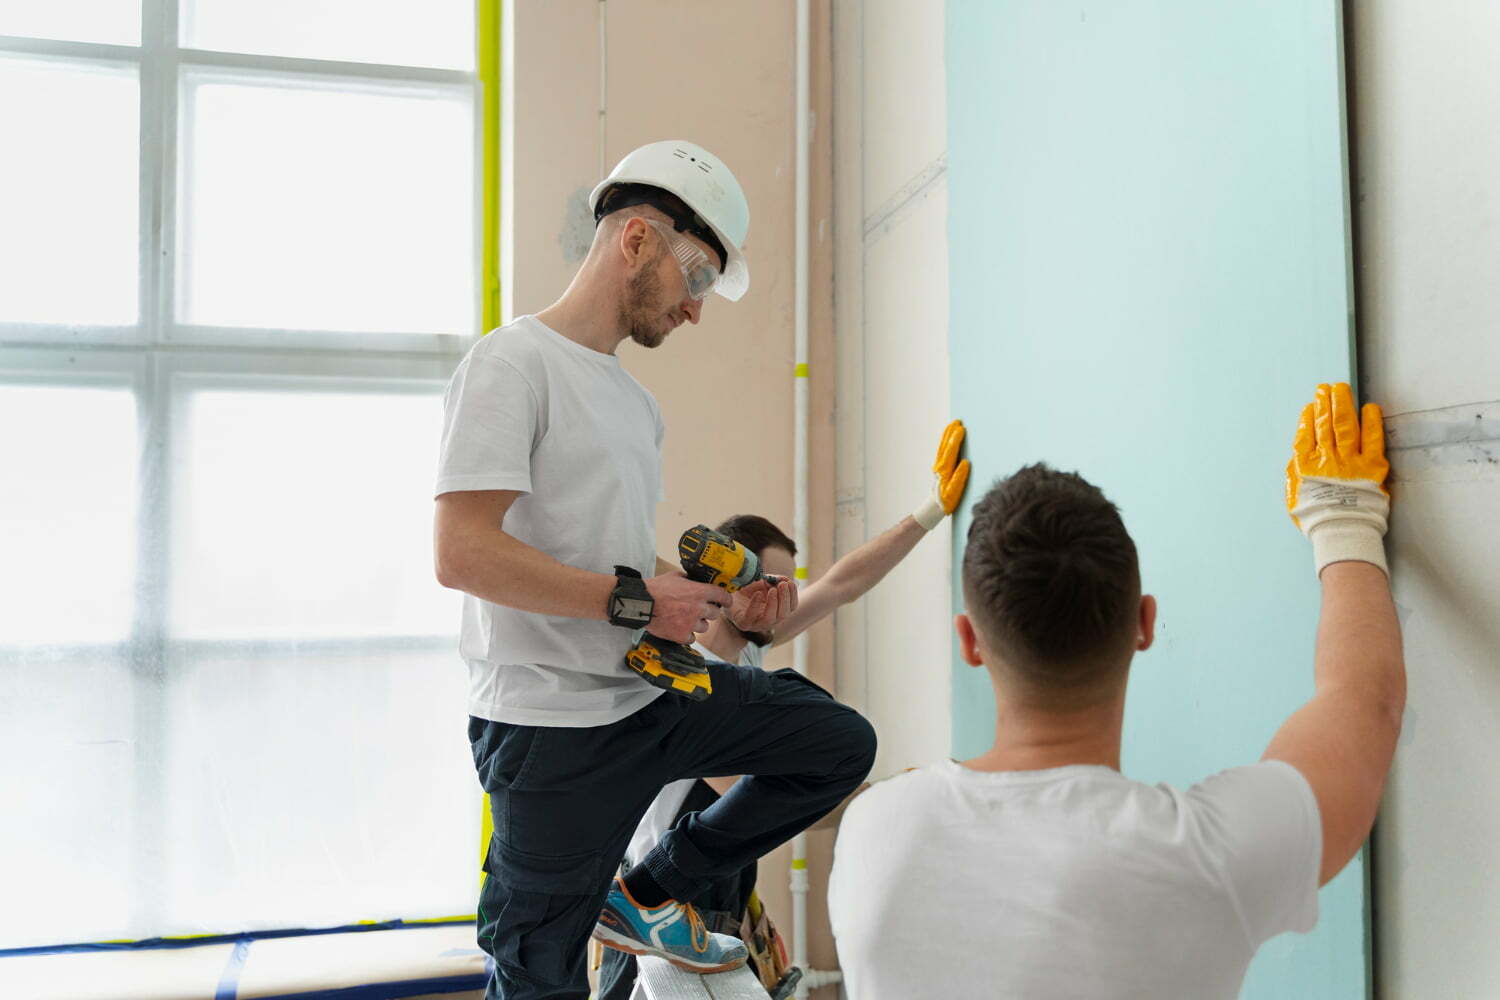 Experienced Plasterers in Rush